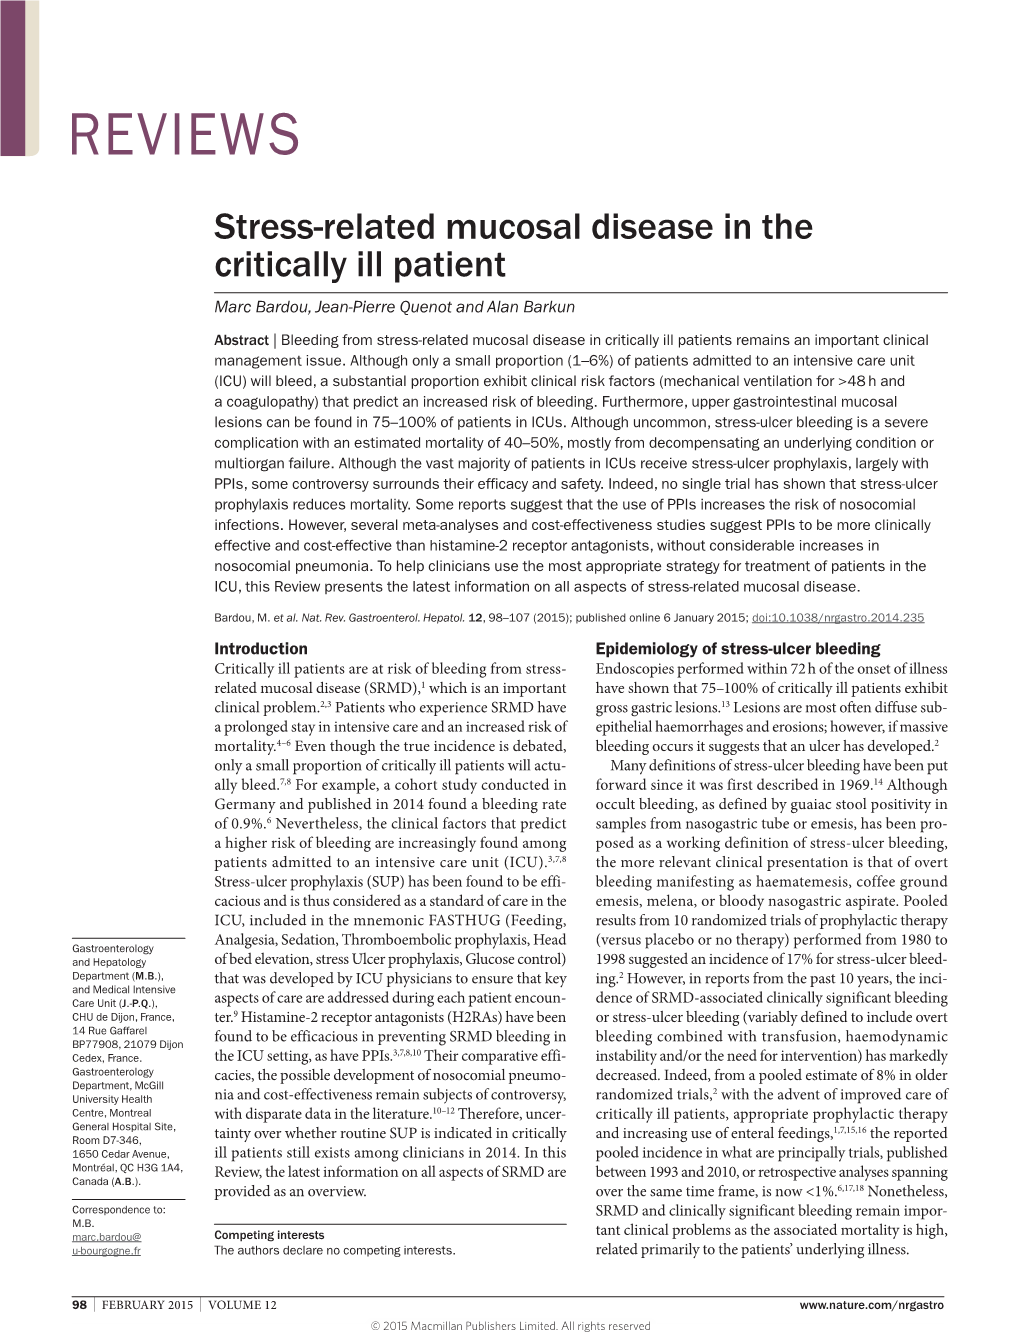 Stress-Related Mucosal Disease in the Critically Ill Patient Marc Bardou, Jean-Pierre Quenot and Alan Barkun